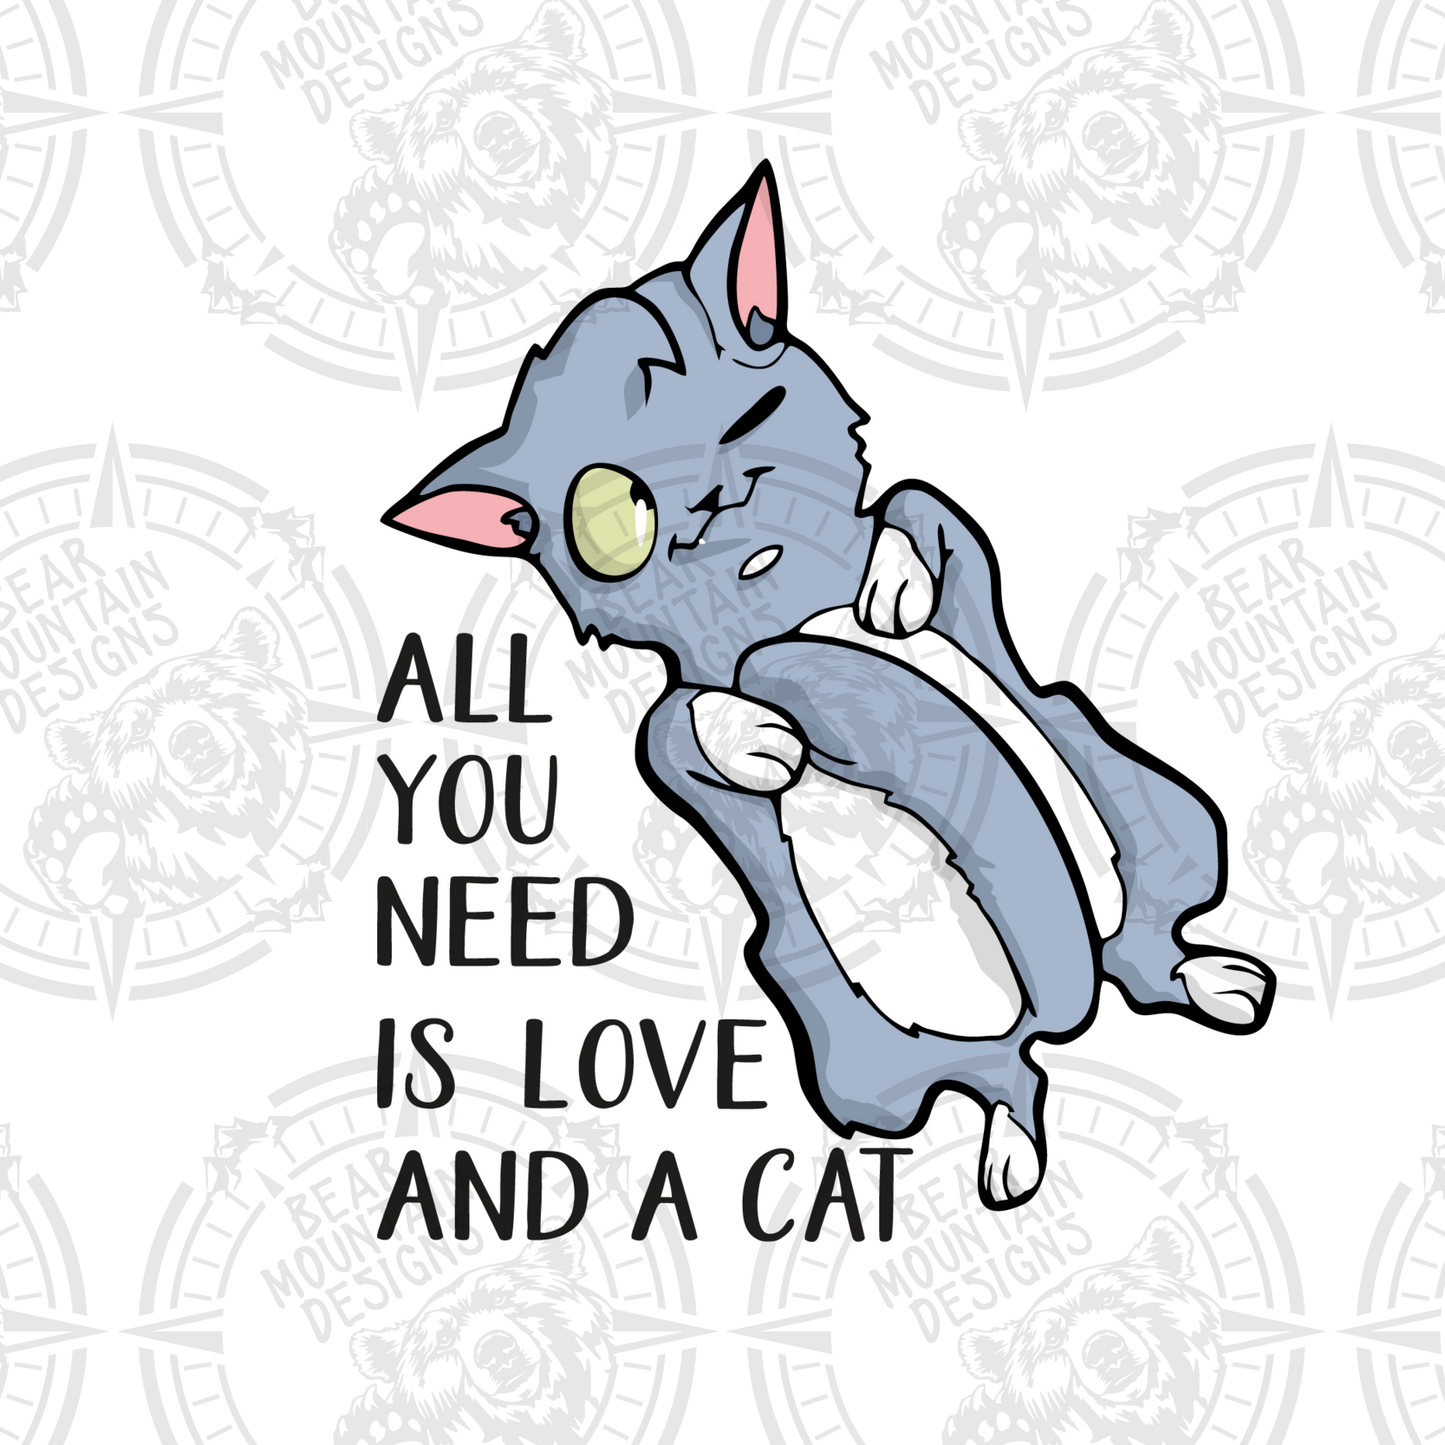 All You Need Is Love And A Cat 1 - White Border